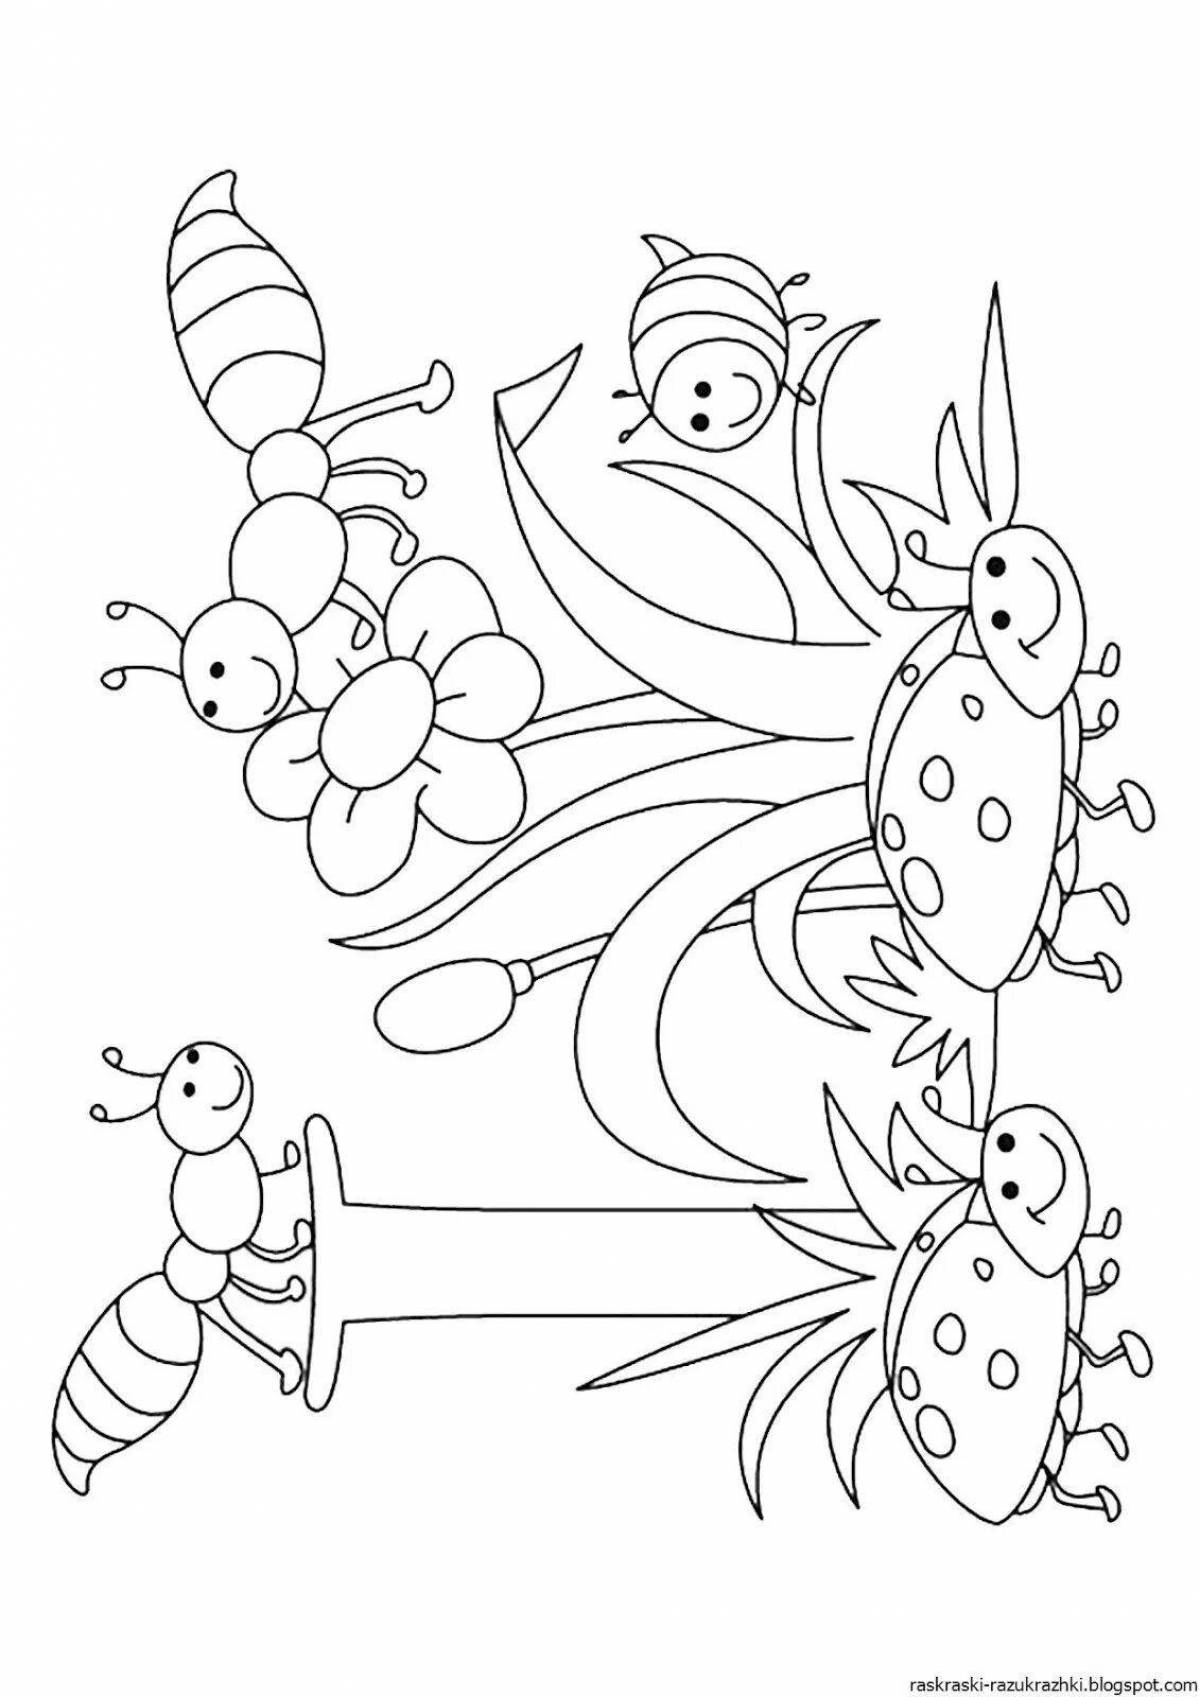 Insects spectacular coloring book